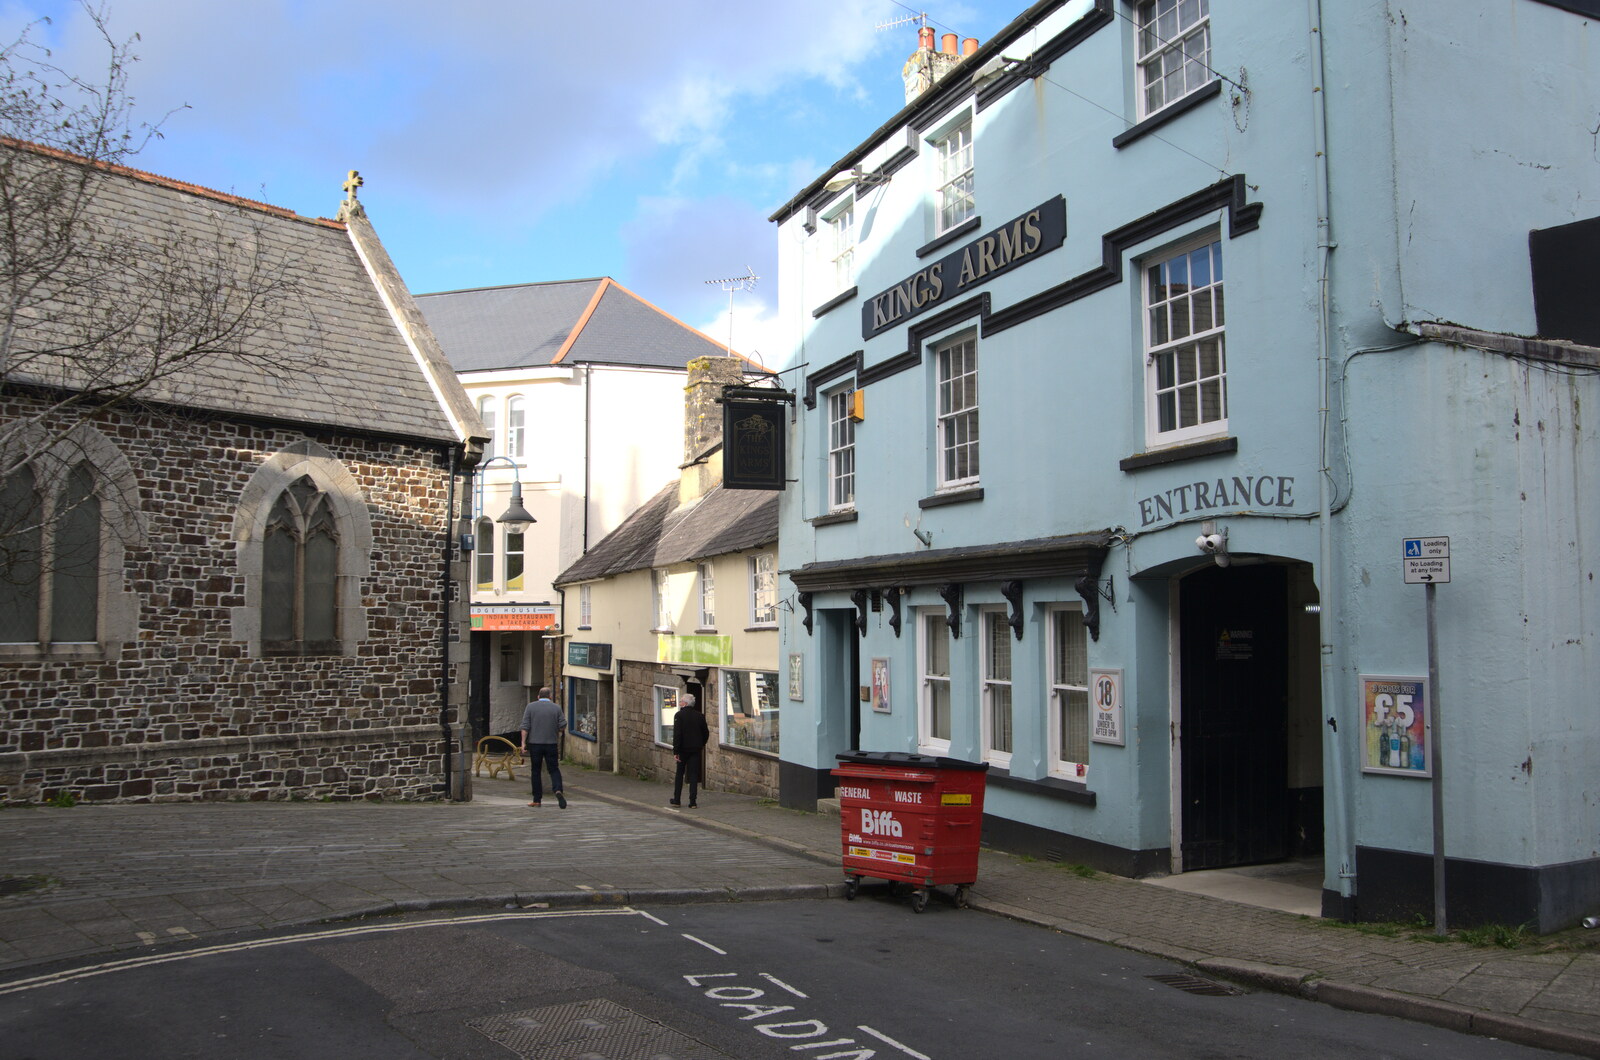 The Kings Arms on St. James Street from Chilli Farms, Okehampton and the Oxenham Arms, South Zeal, Devon - 10th April 2023